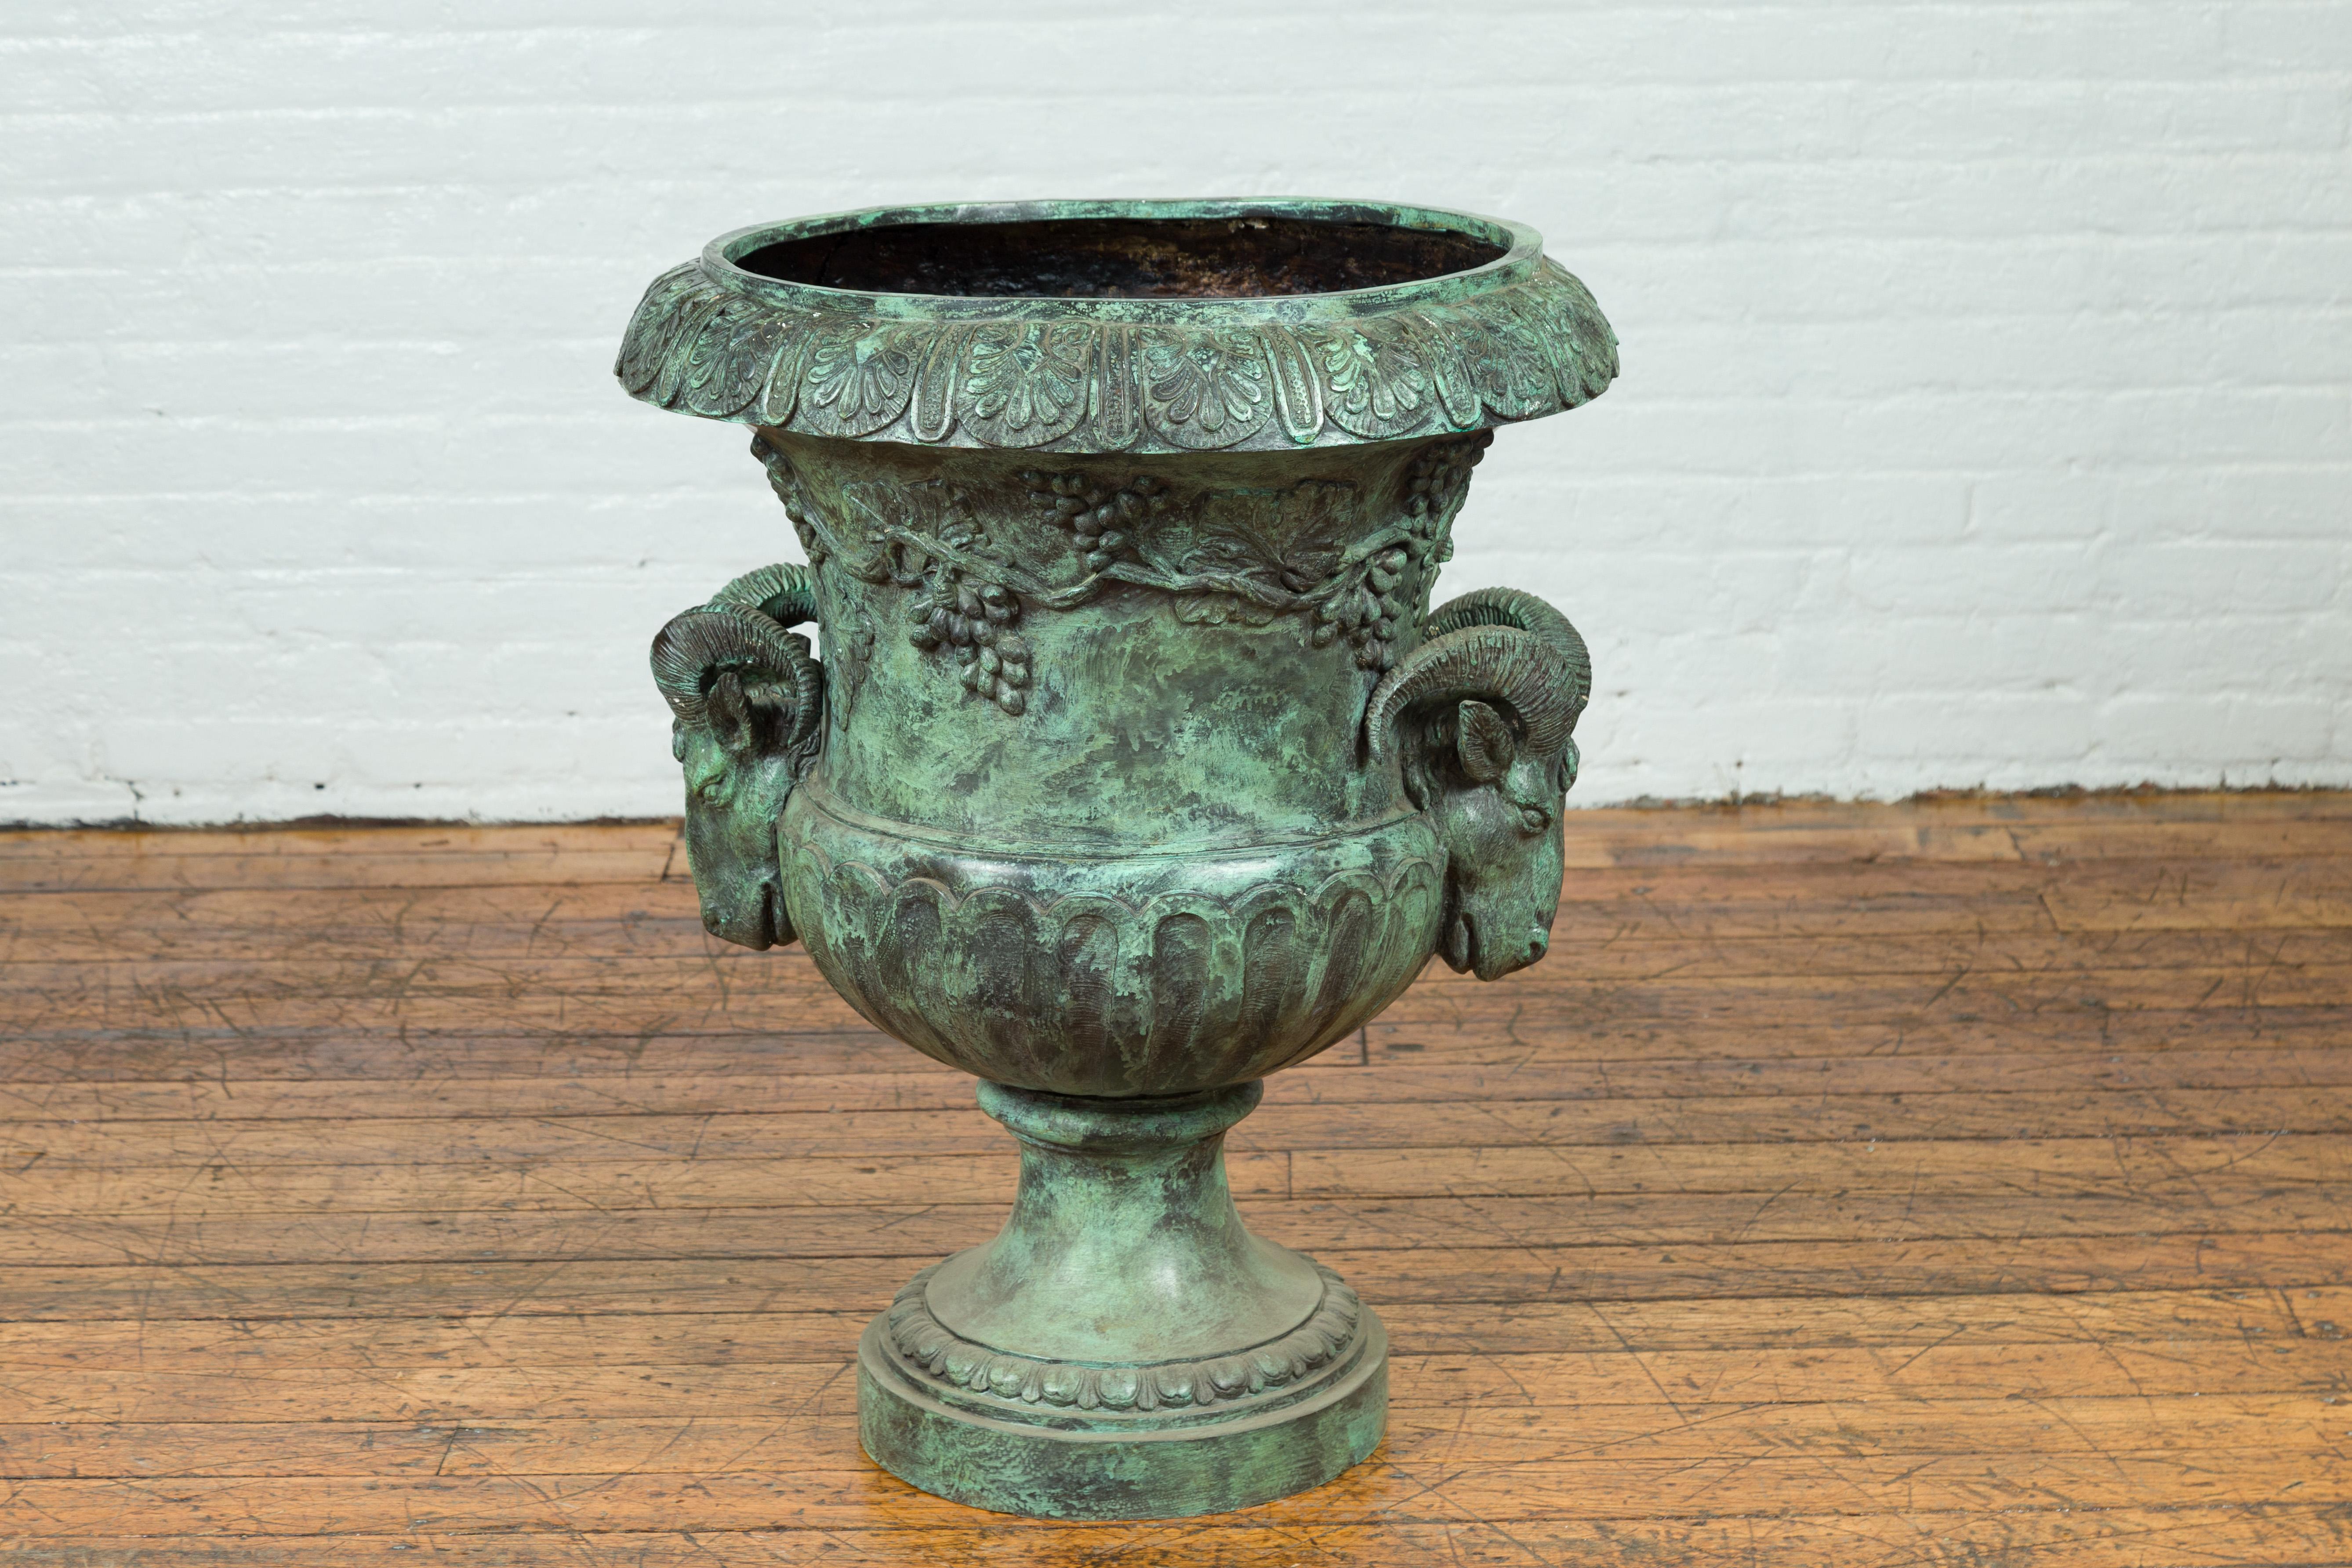 A large Classical Roman style bronze urn from the 20th century with verde patina and rams heads and floral accents. Created with the traditional technique of the lost-wax (à la cire perdue) that allows a great precision in the details, this large